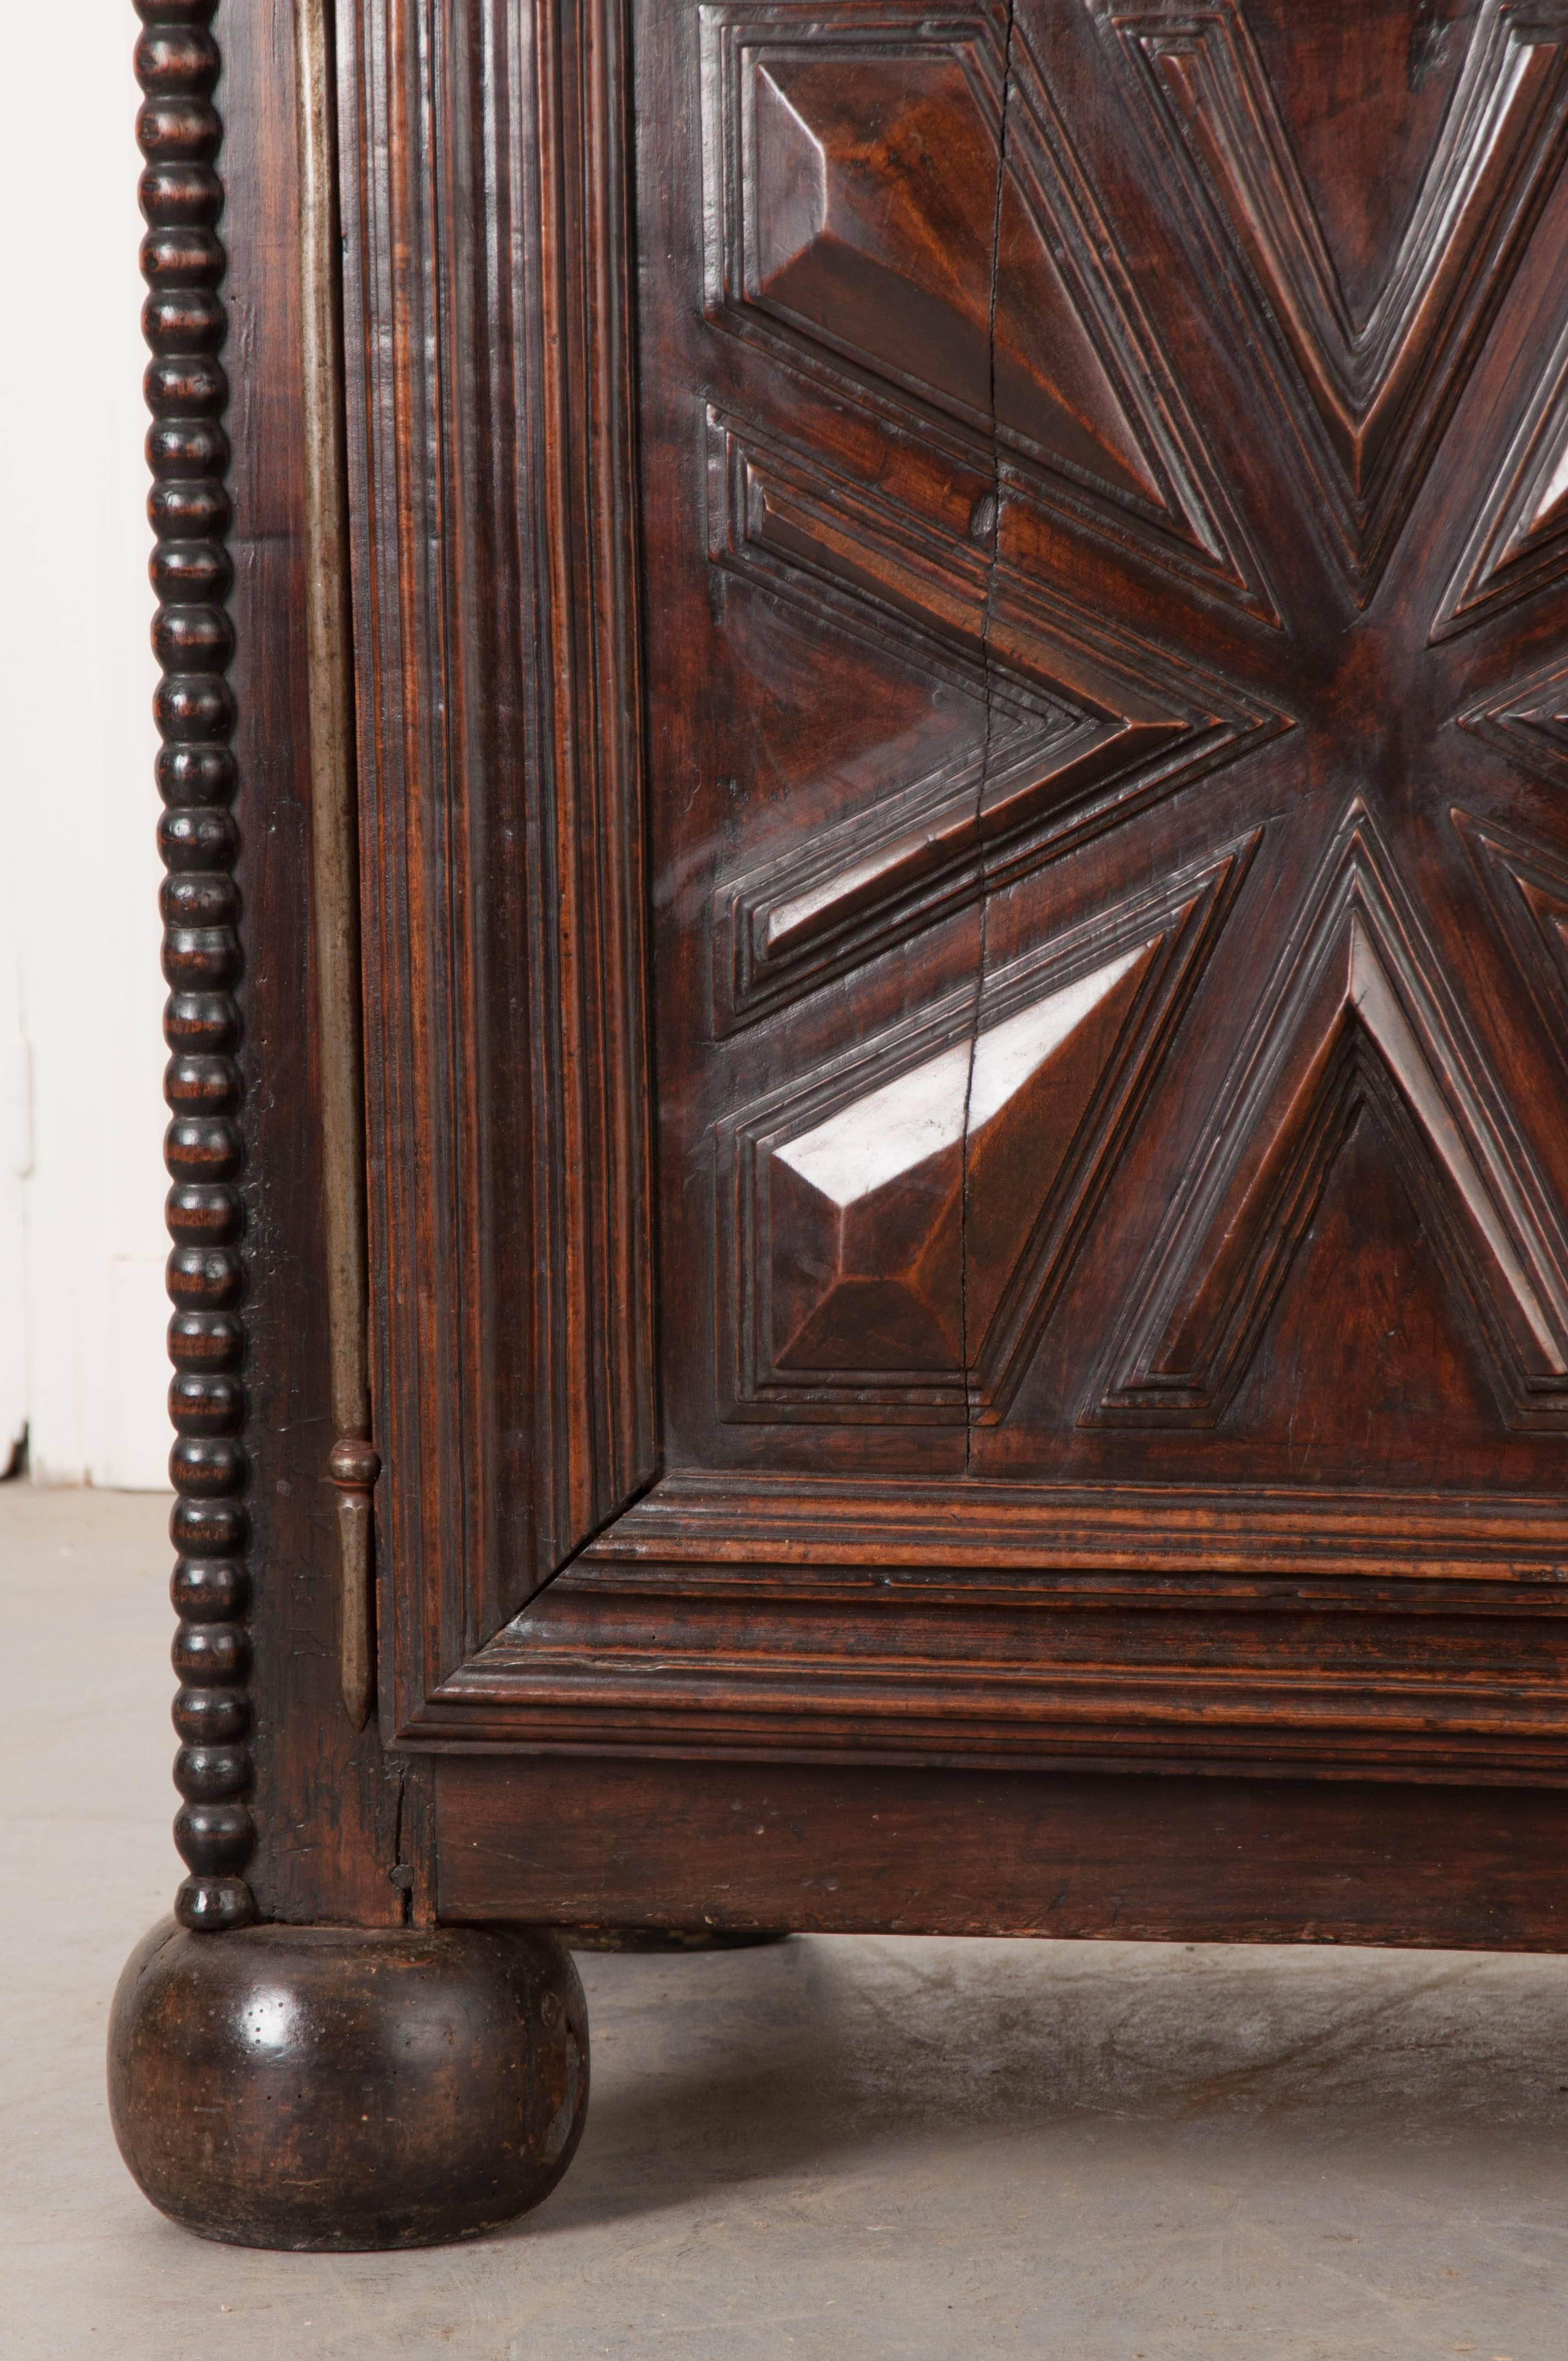 A sizable oak buffet, done in the Louis XIII style, from 18th century France. This tall case piece features extraordinary hand-carved panels, in a geometric style, found in its doors and sides. The two drawers as well as the two doors have wonderful